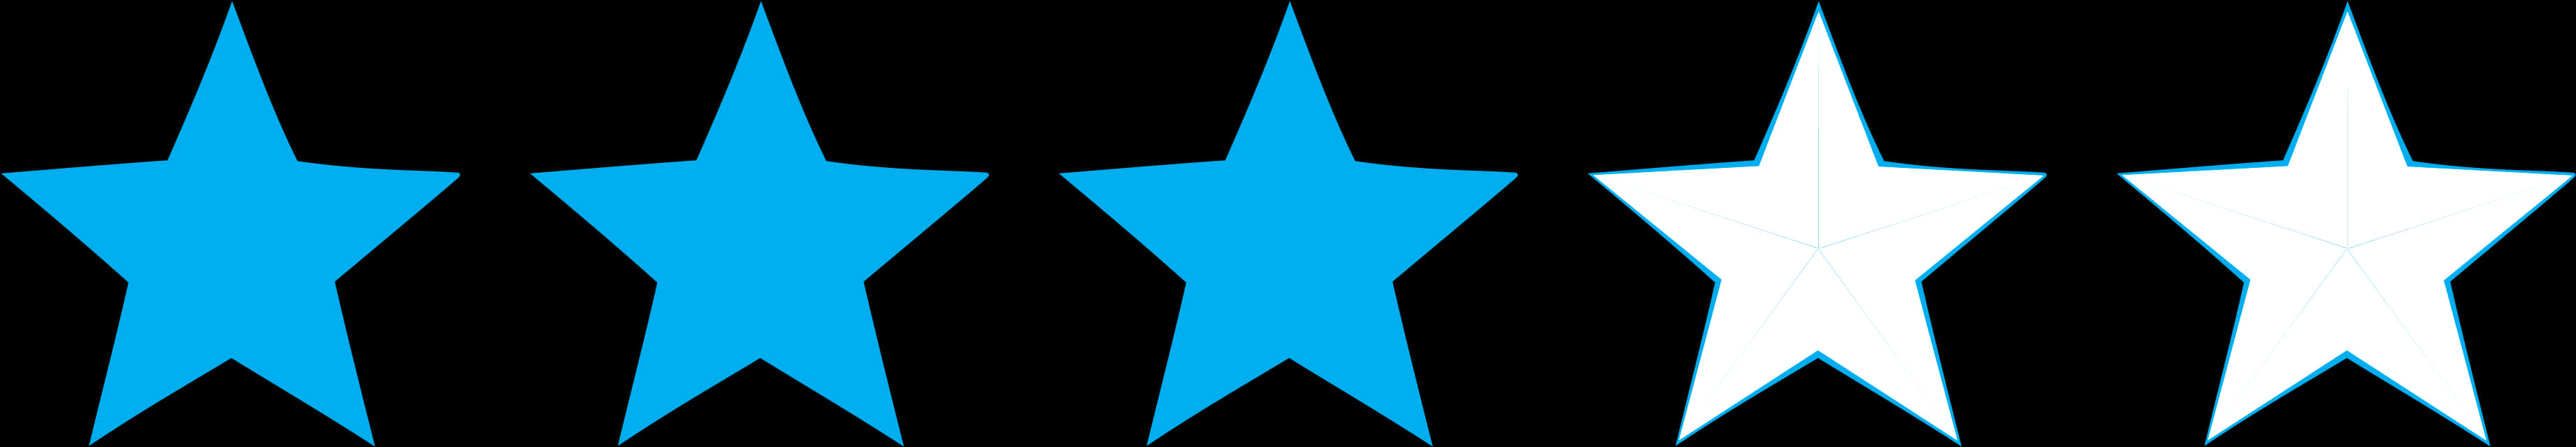 Five Star Rating Gradient PNG